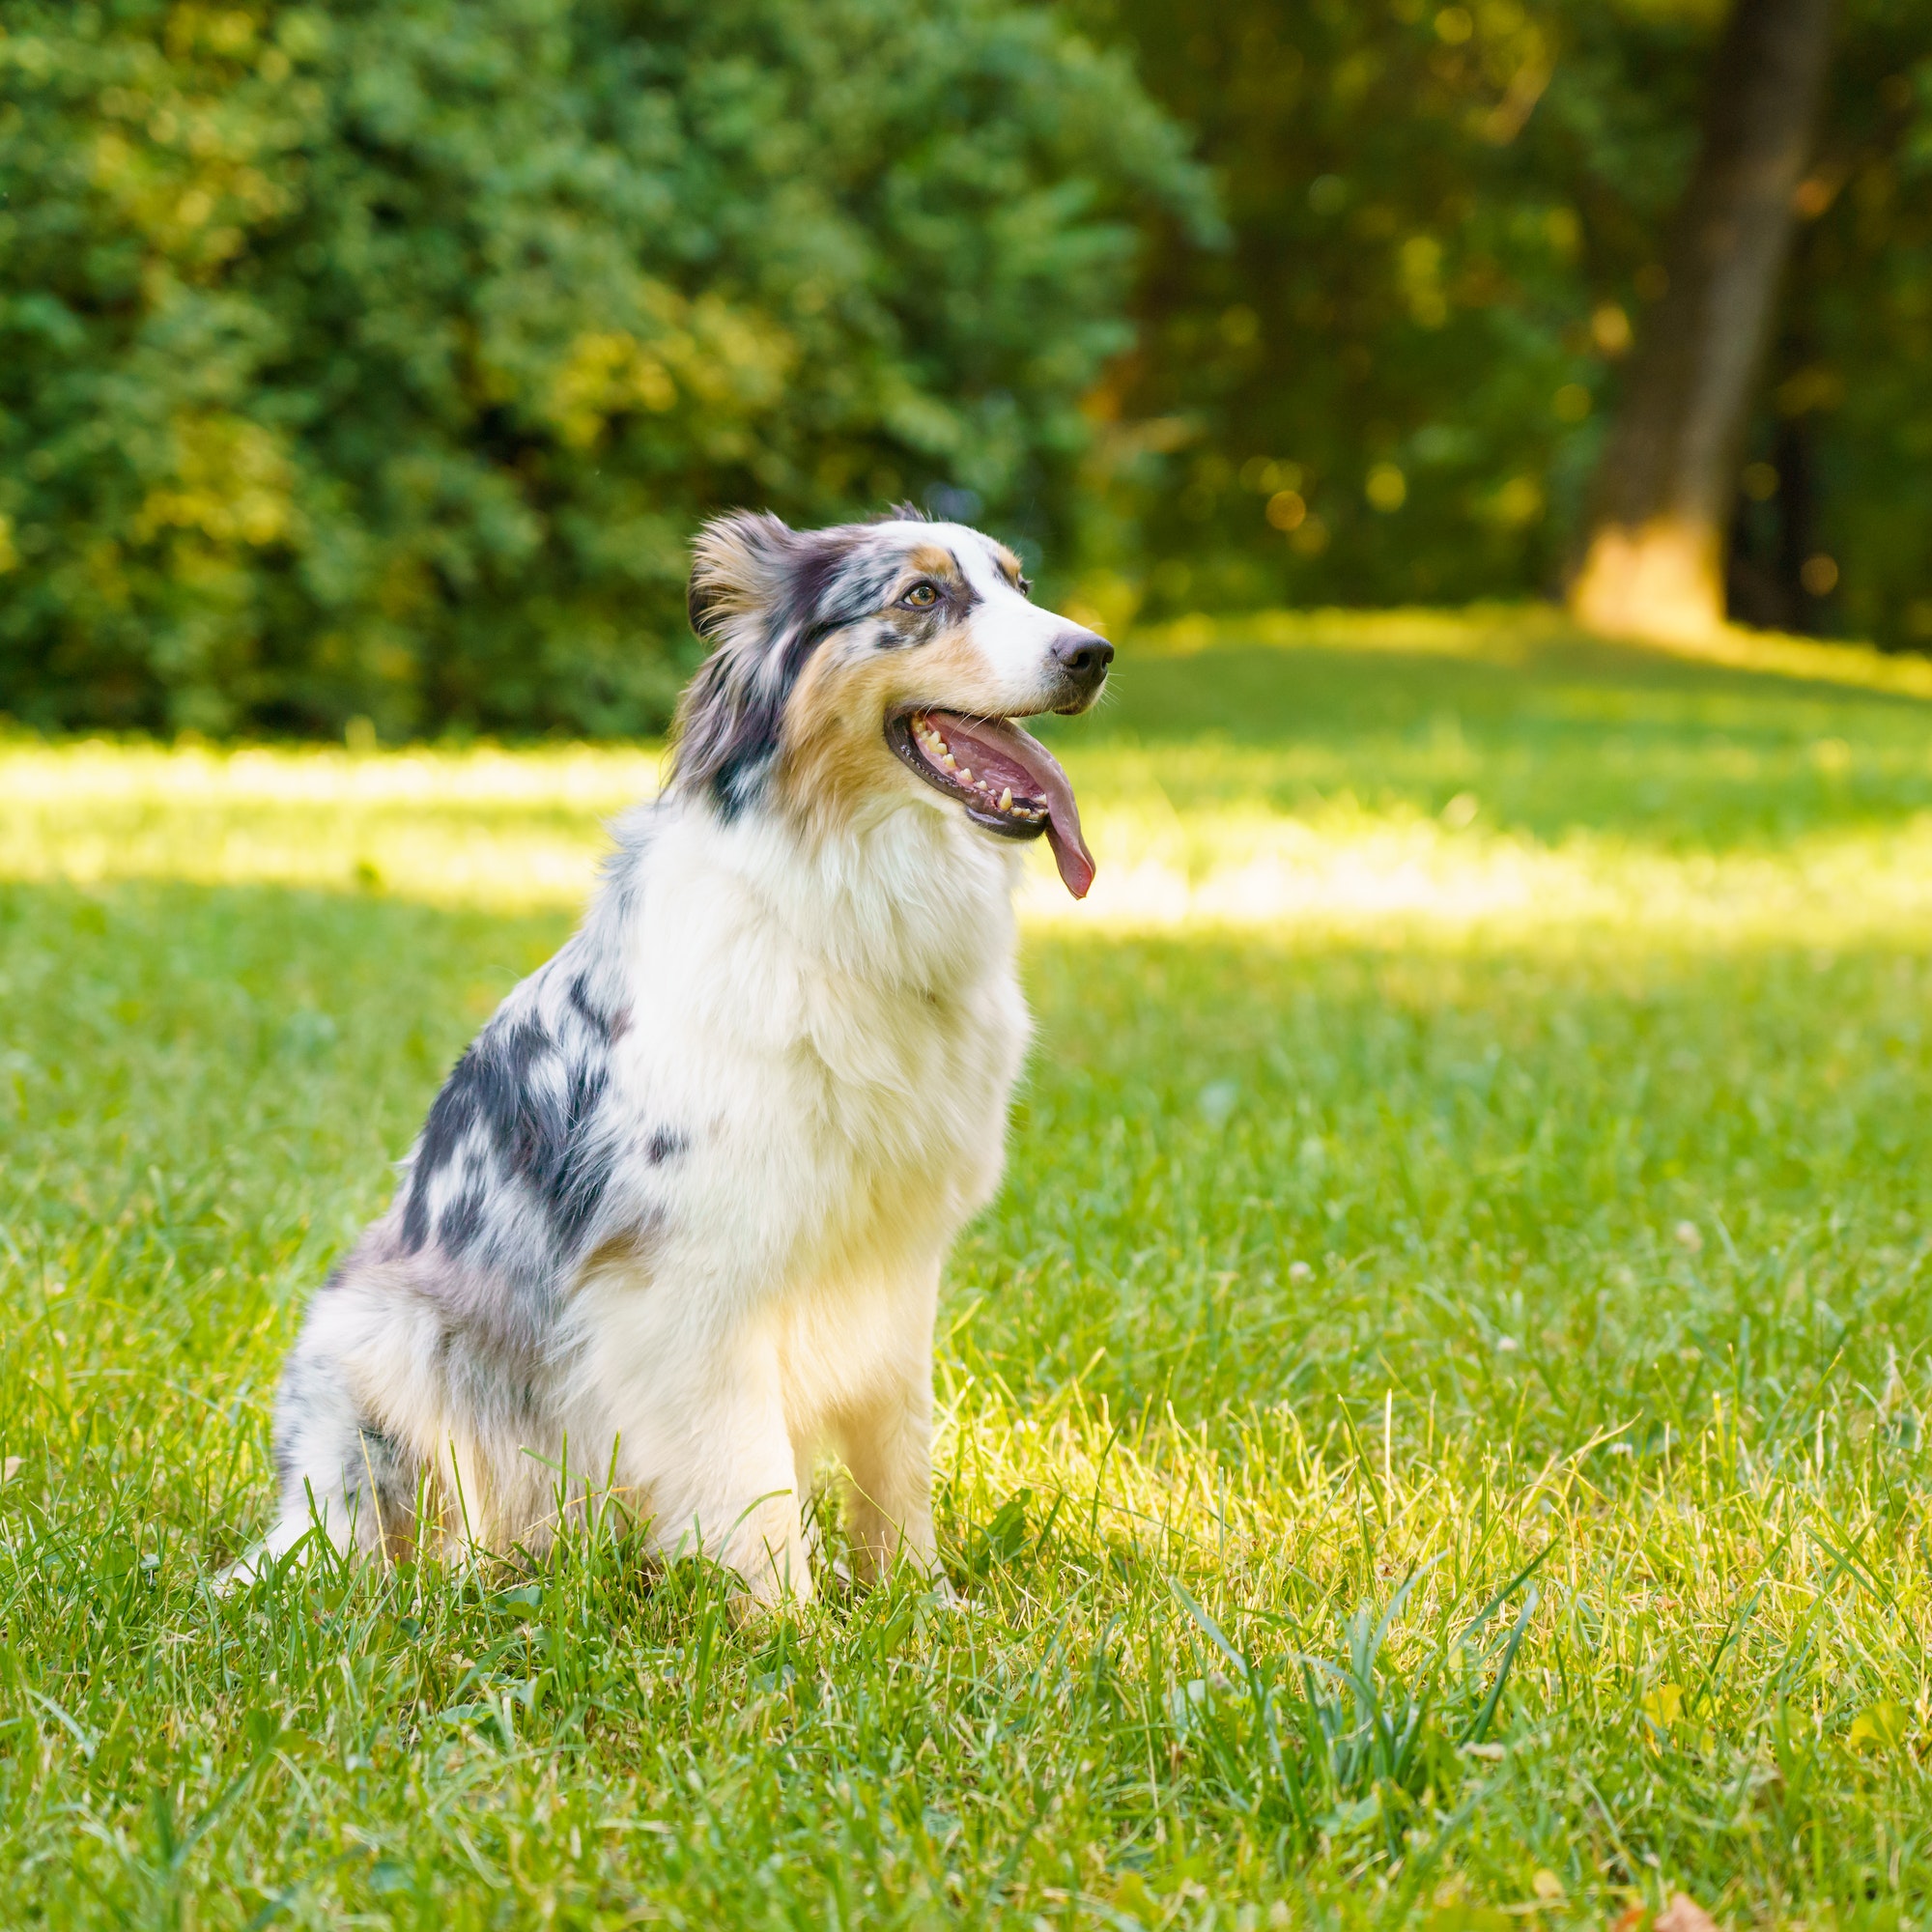 Lovely dog Australian Shepherd sitting in grass with tongue out and resting after morning walk in